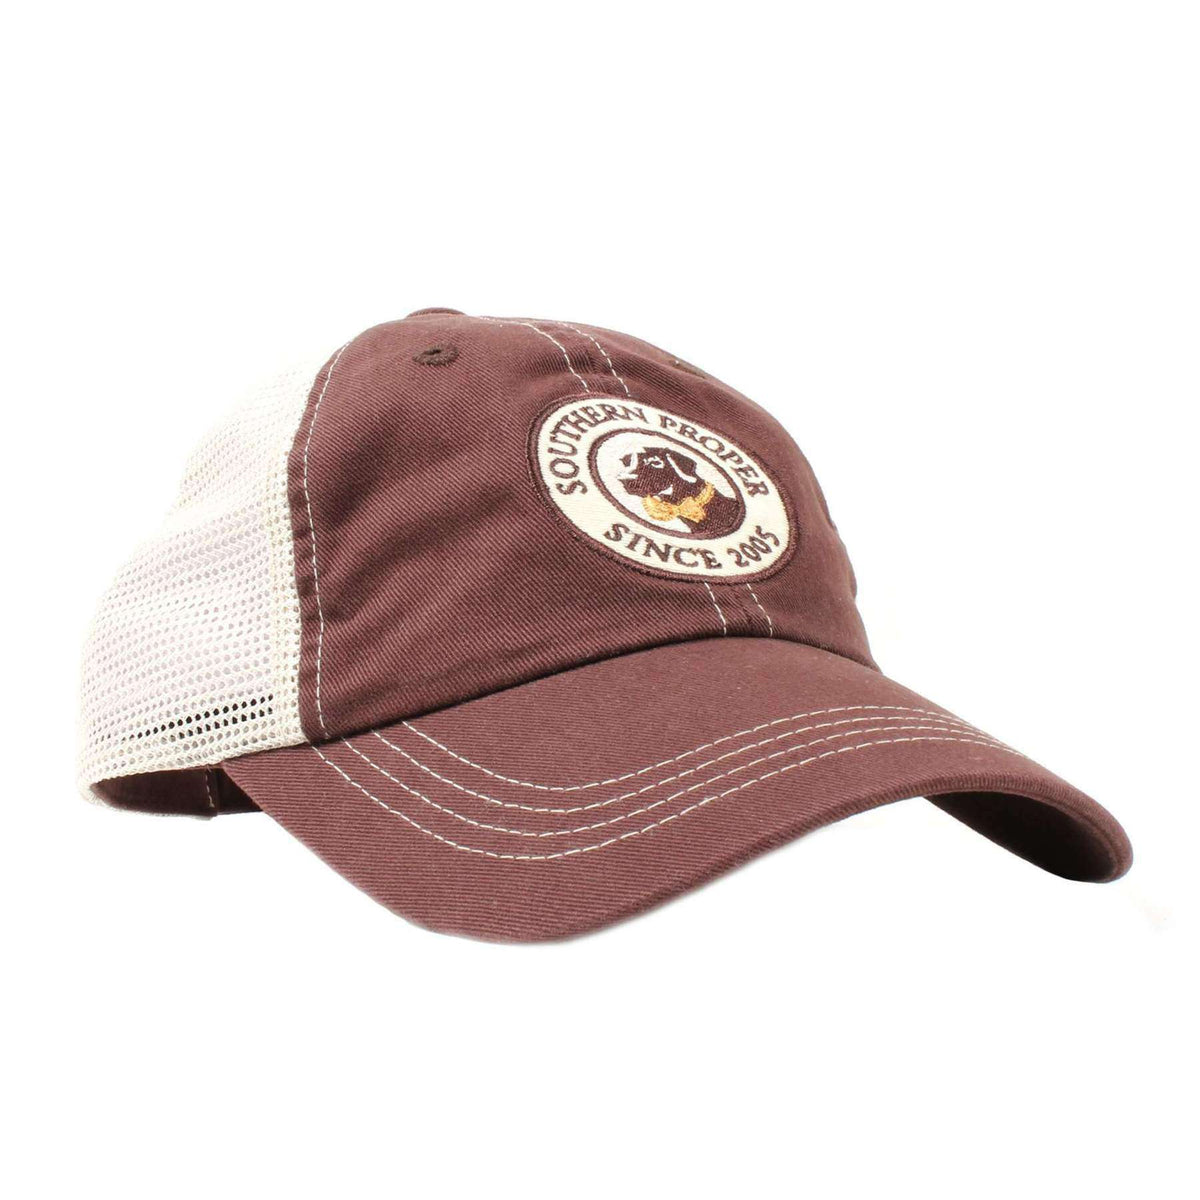 Original Logo Patch Trucker Hat in Chestnut by Southern Proper - Country Club Prep